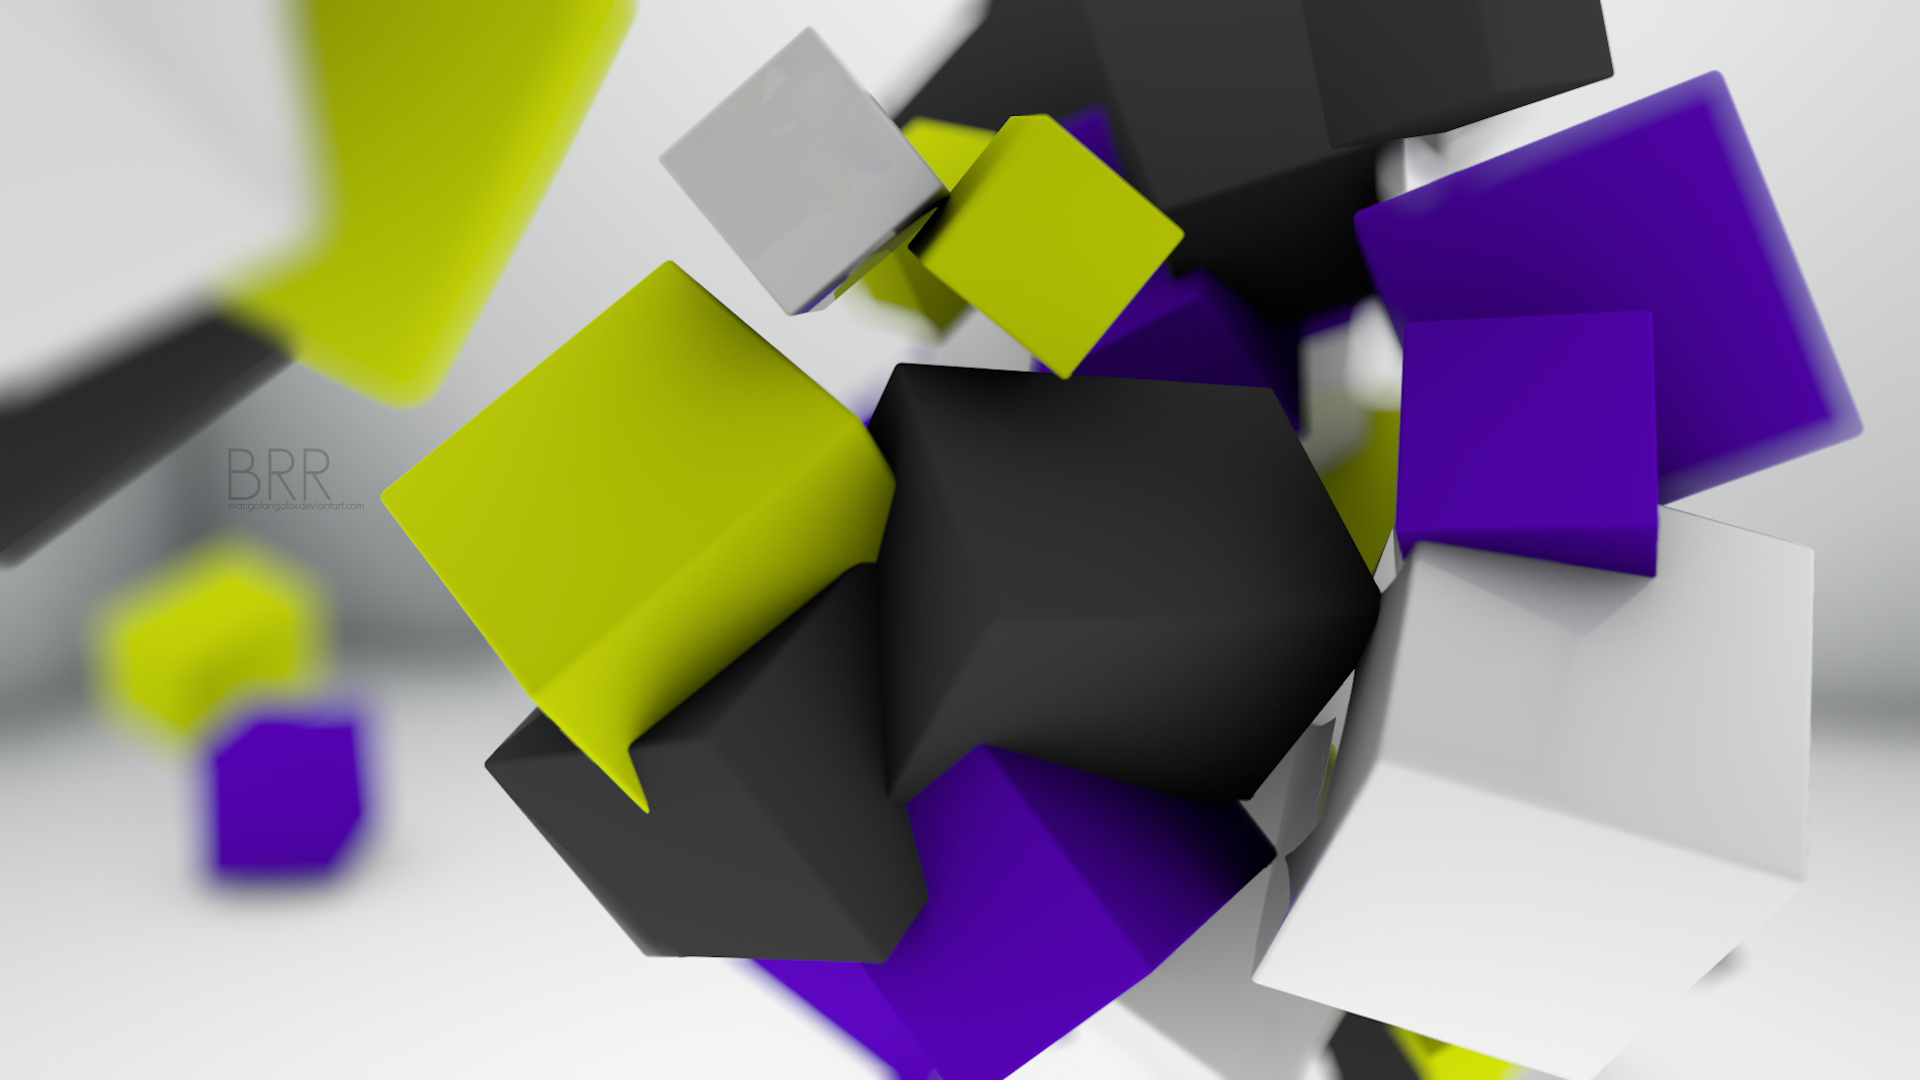 Abstract Cubes Samsung wallpaper, Android wallpaper, 3d